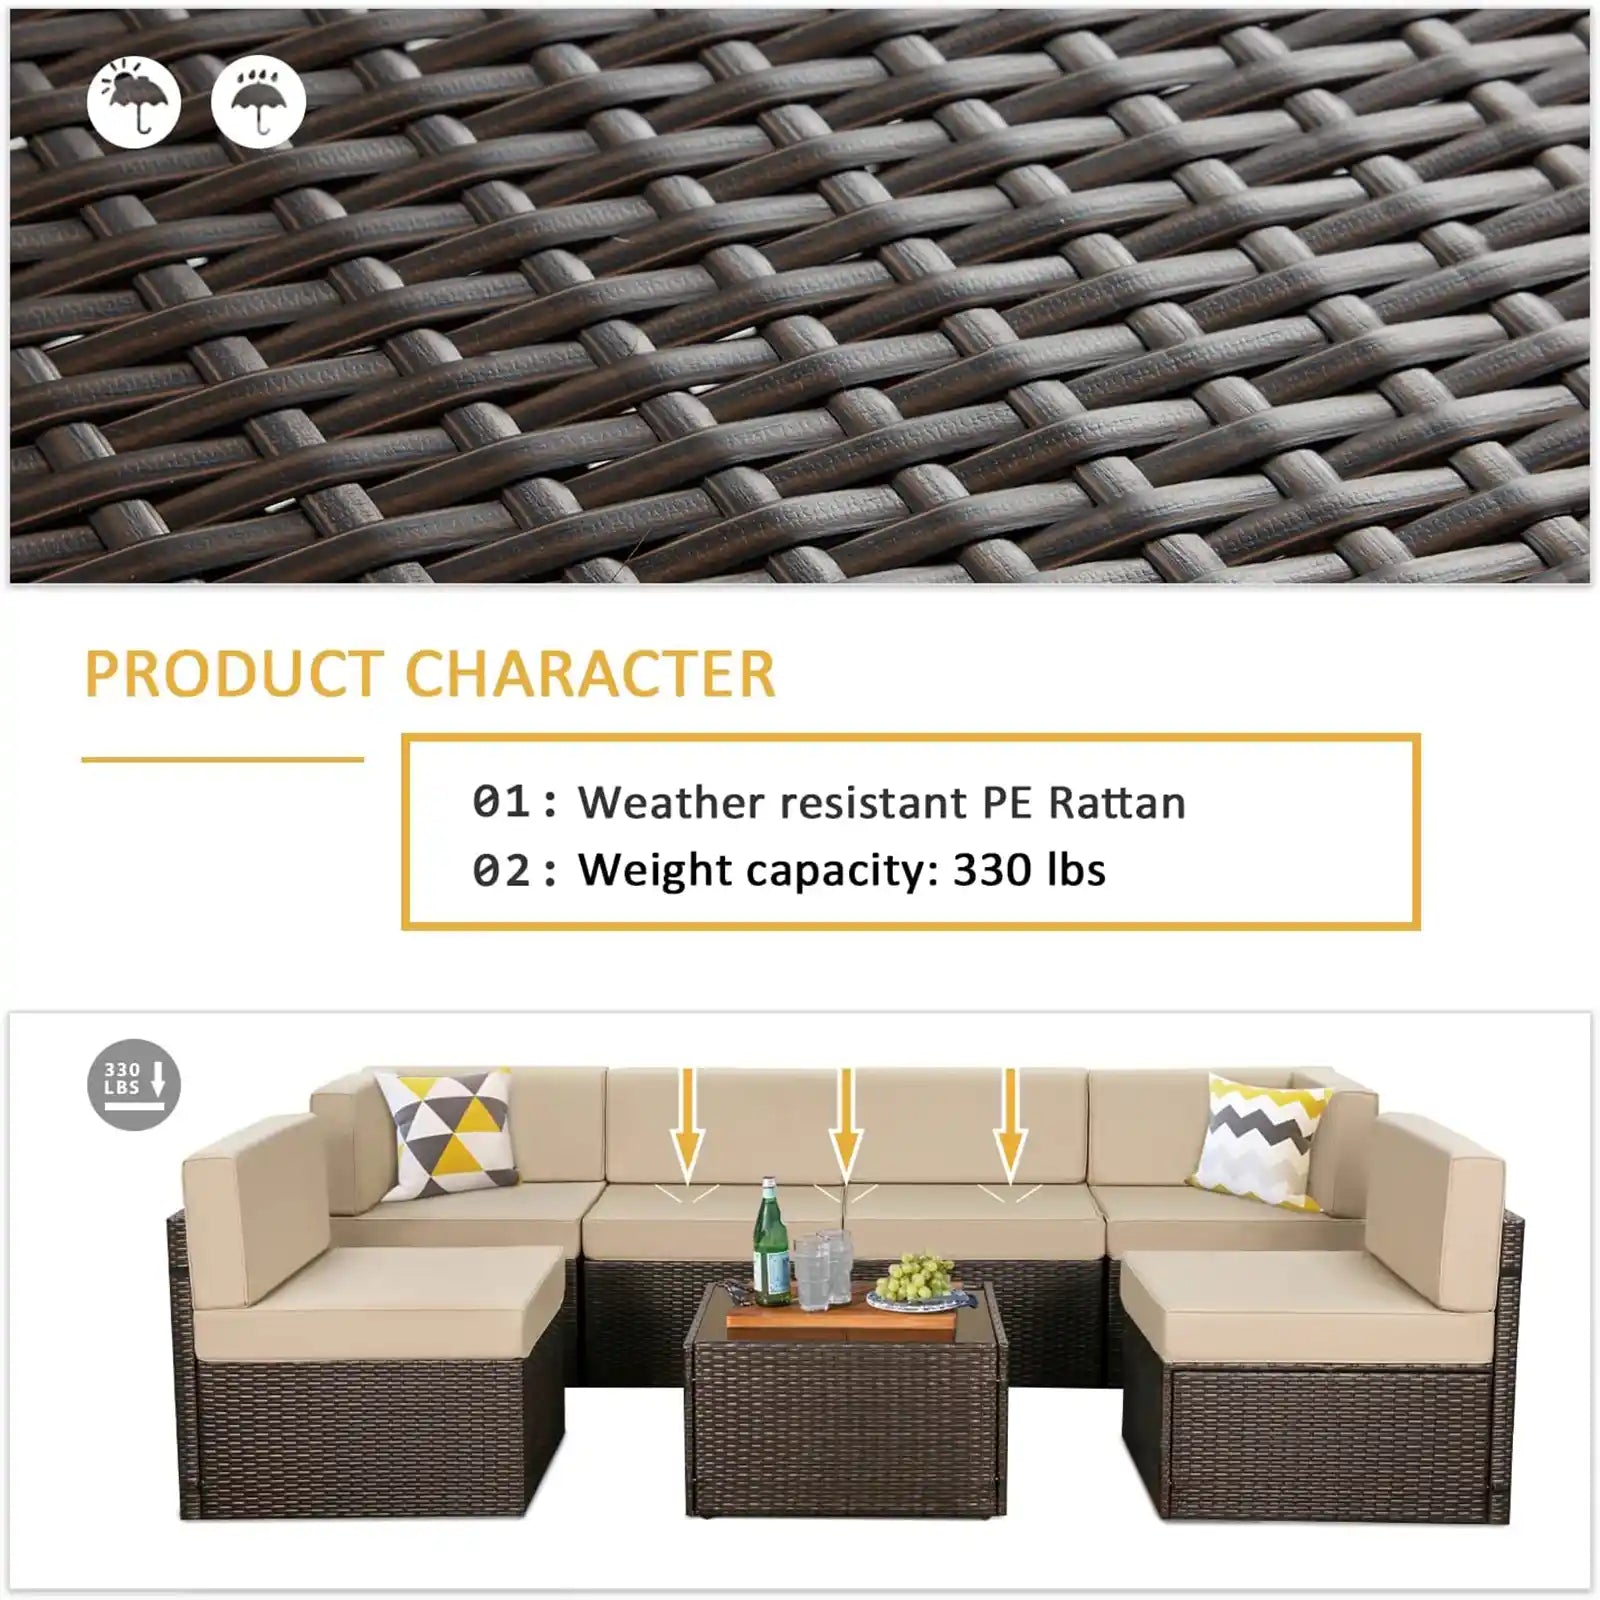 7 Piece Outdoor Patio Furniture Set, PE Rattan Wicker Sofa Set, Outdoor Sectional Furniture Chair Set with Cushions and Tea Table